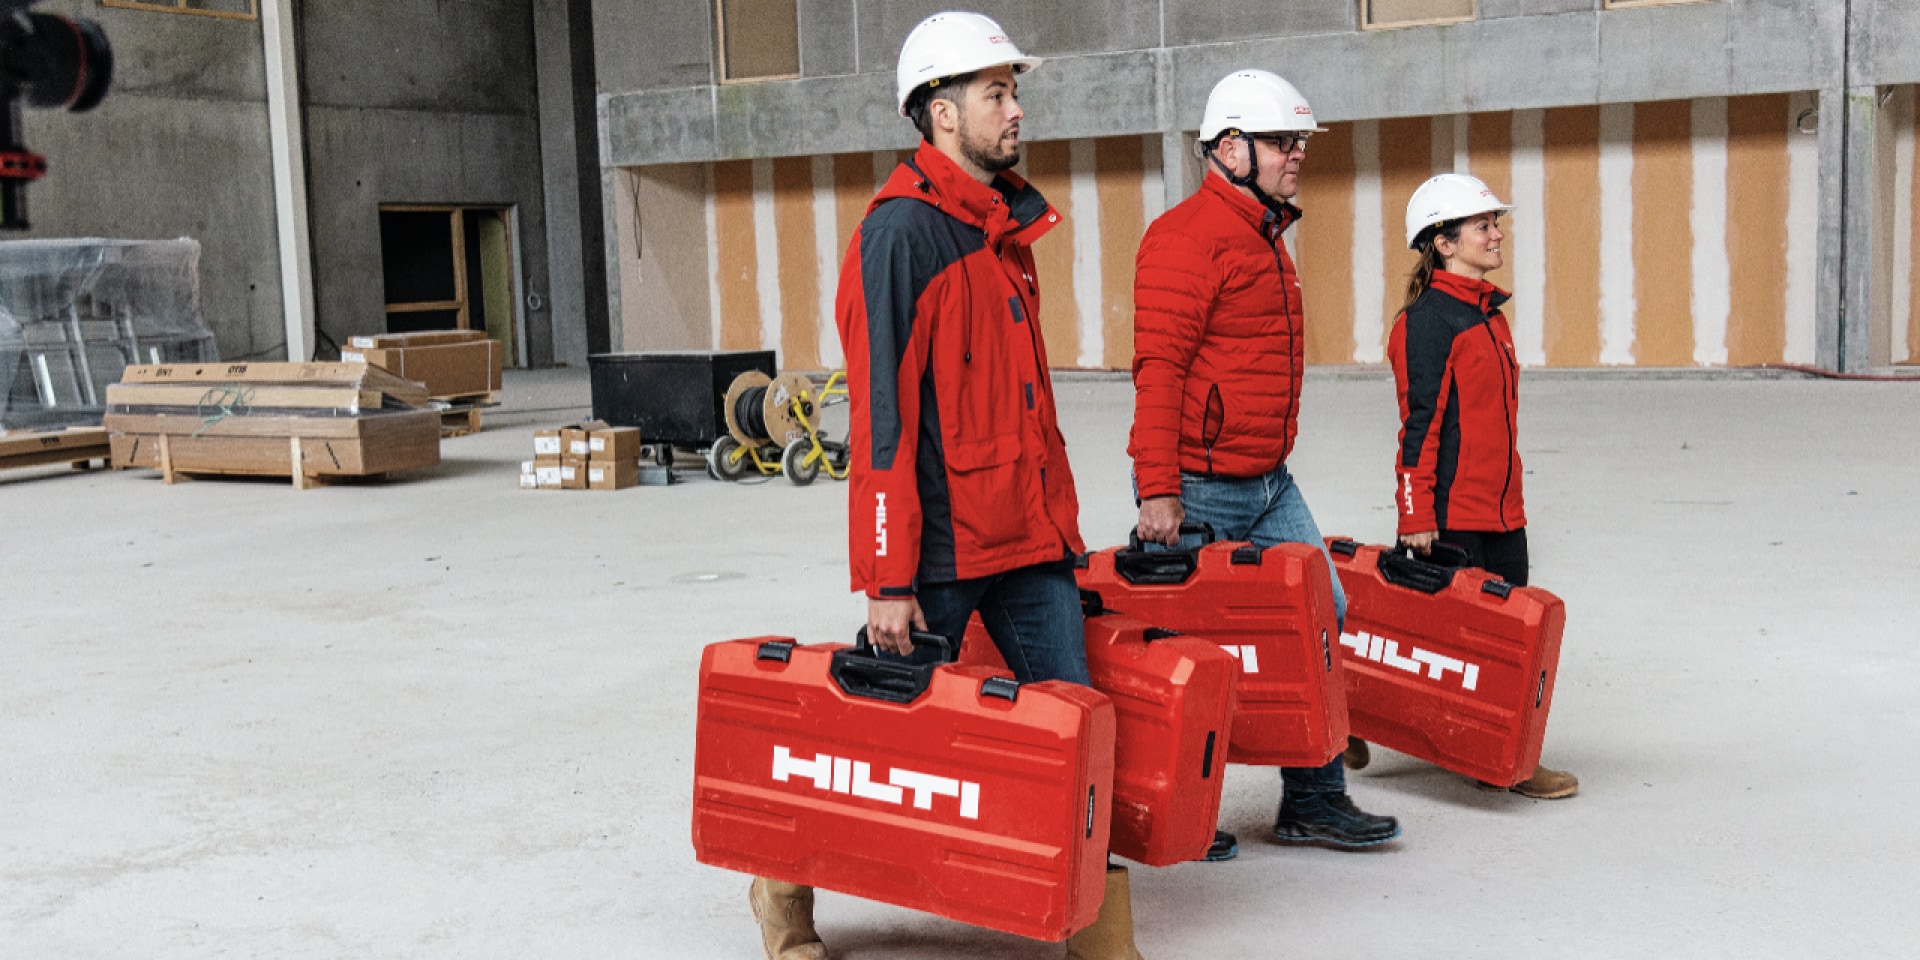 Hilti account managers with tools